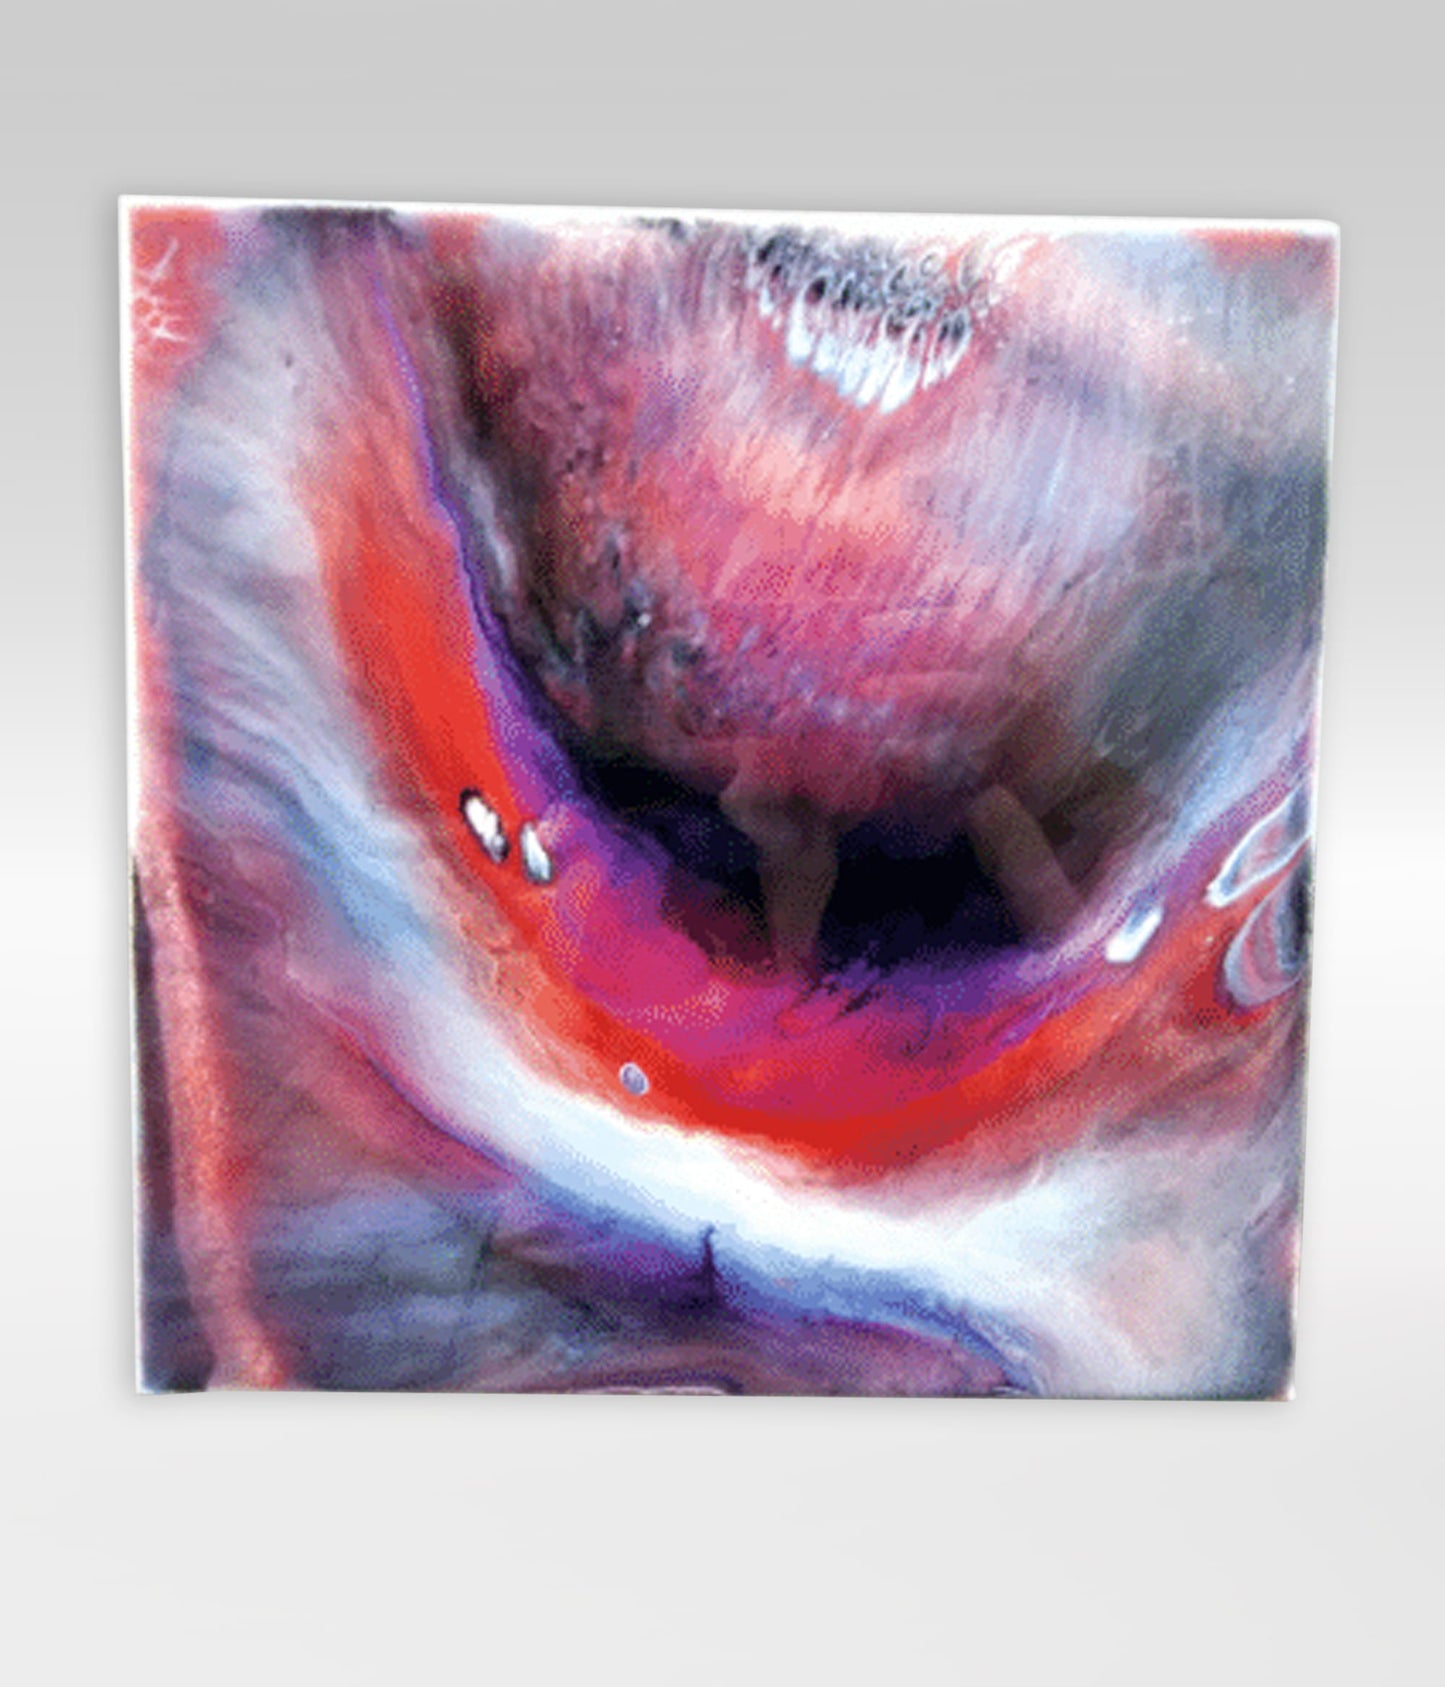 Vortex – 12 x 12 Resin Painting On Gallery Wrapped Canvas